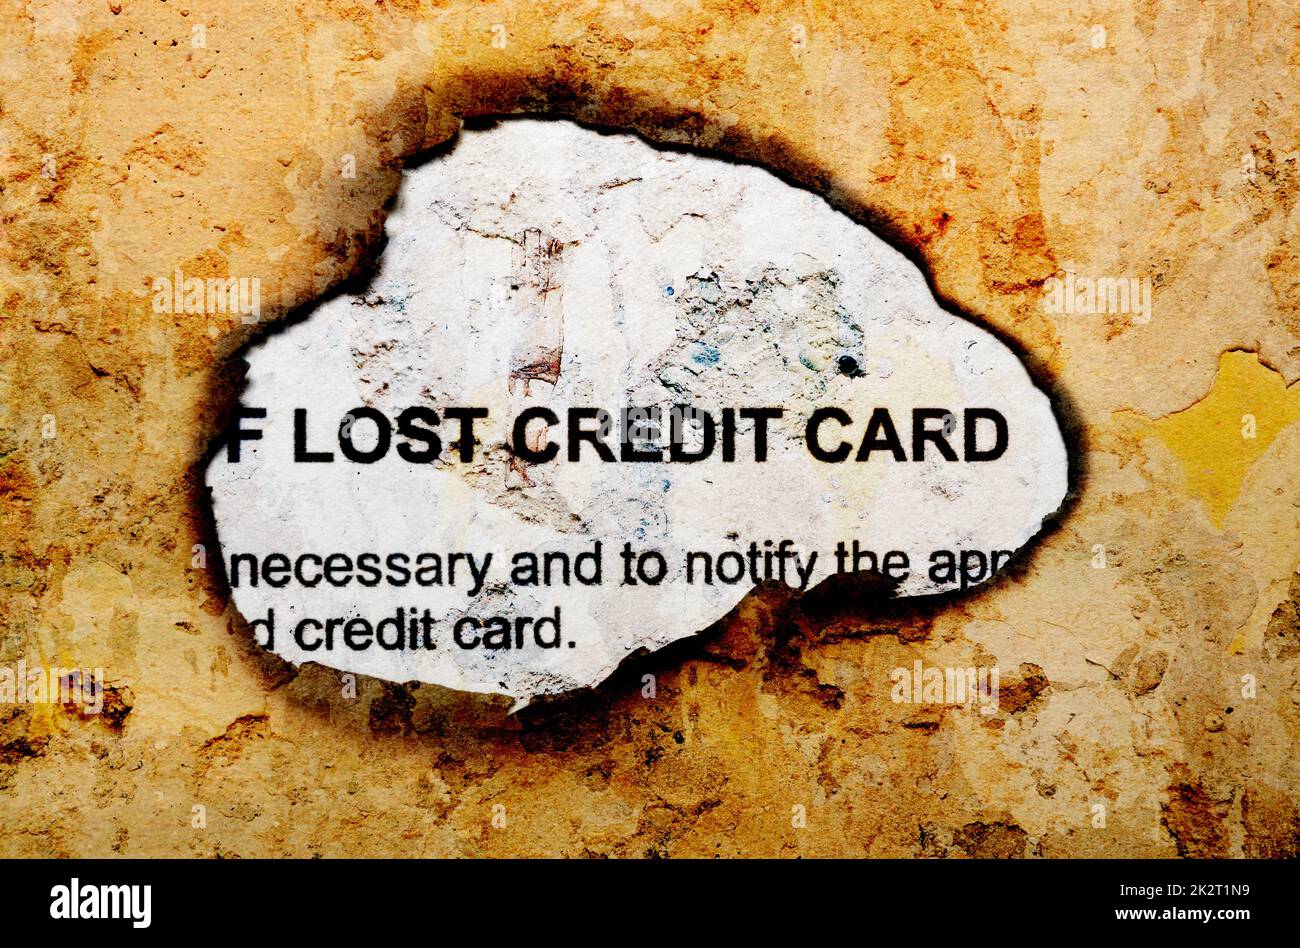 Lost credit card text on grunge background Stock Photo